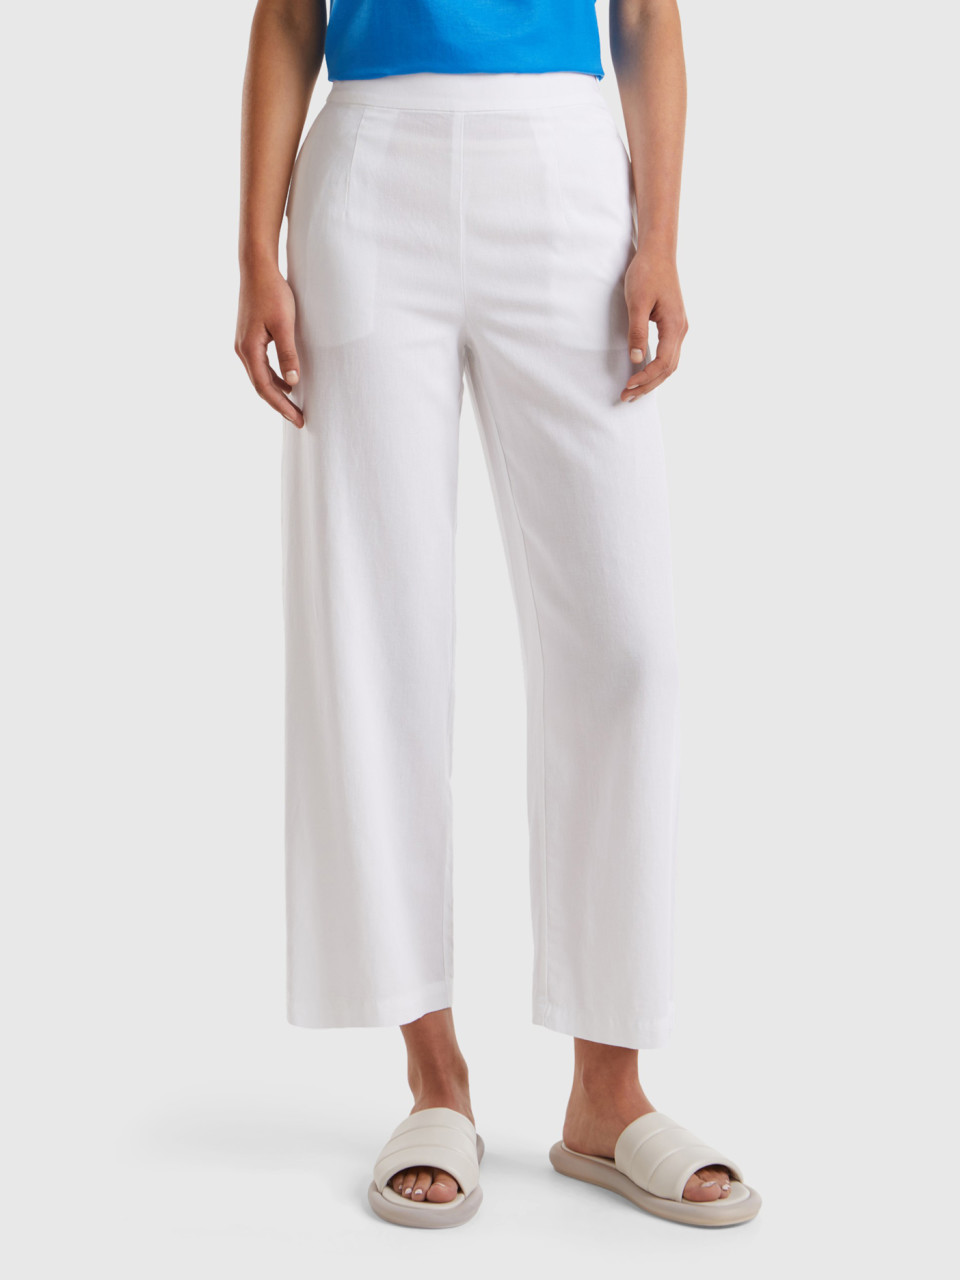 Benetton, Cropped Trousers In Sustainable Viscose Blend, White, Women